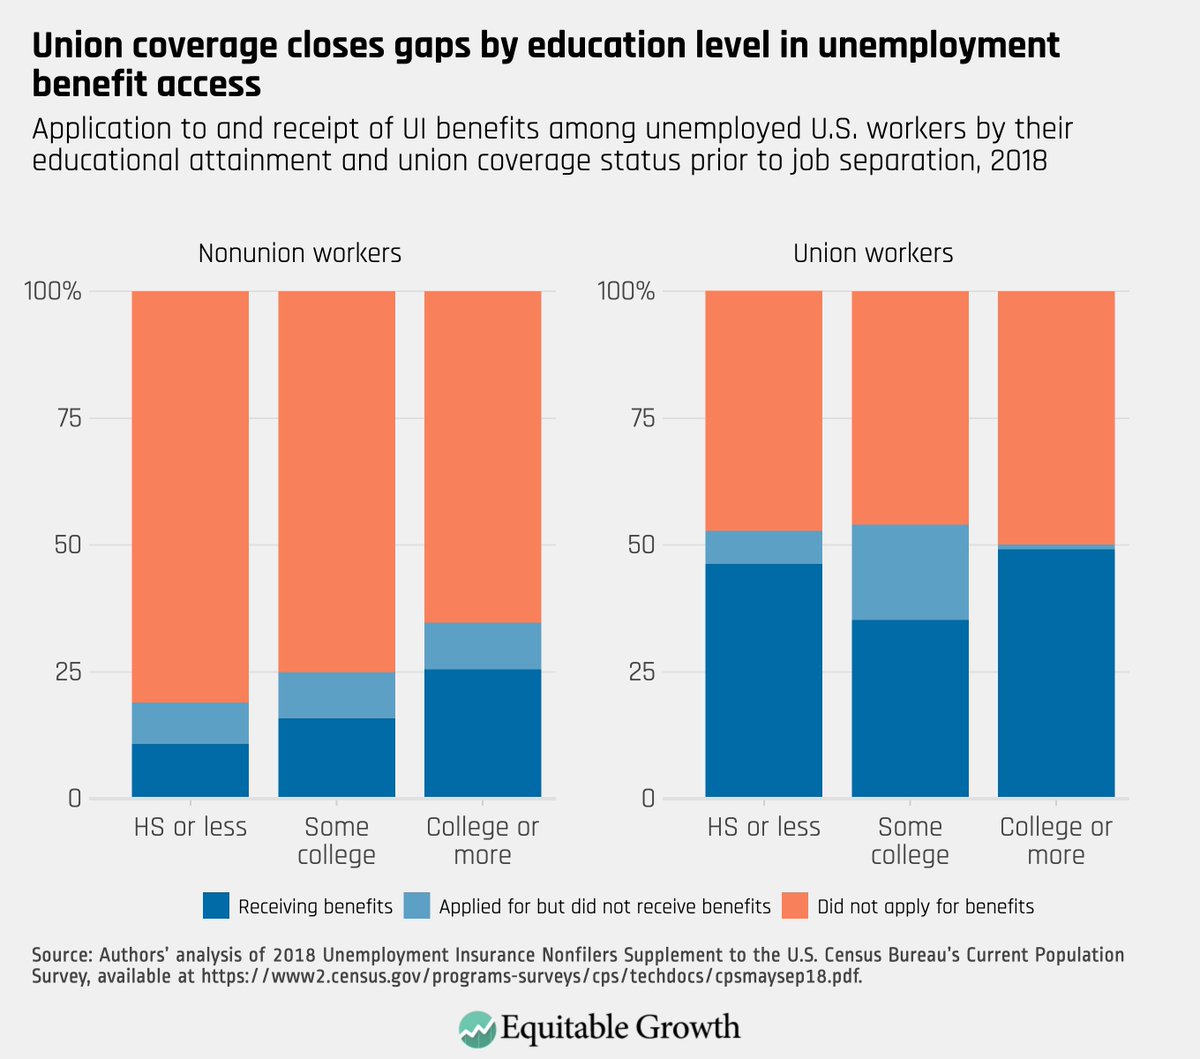 But here’s another fact about unions and UI receipt. When we look at workers who are members of unions, those gaps by education level disappear. (5/10)